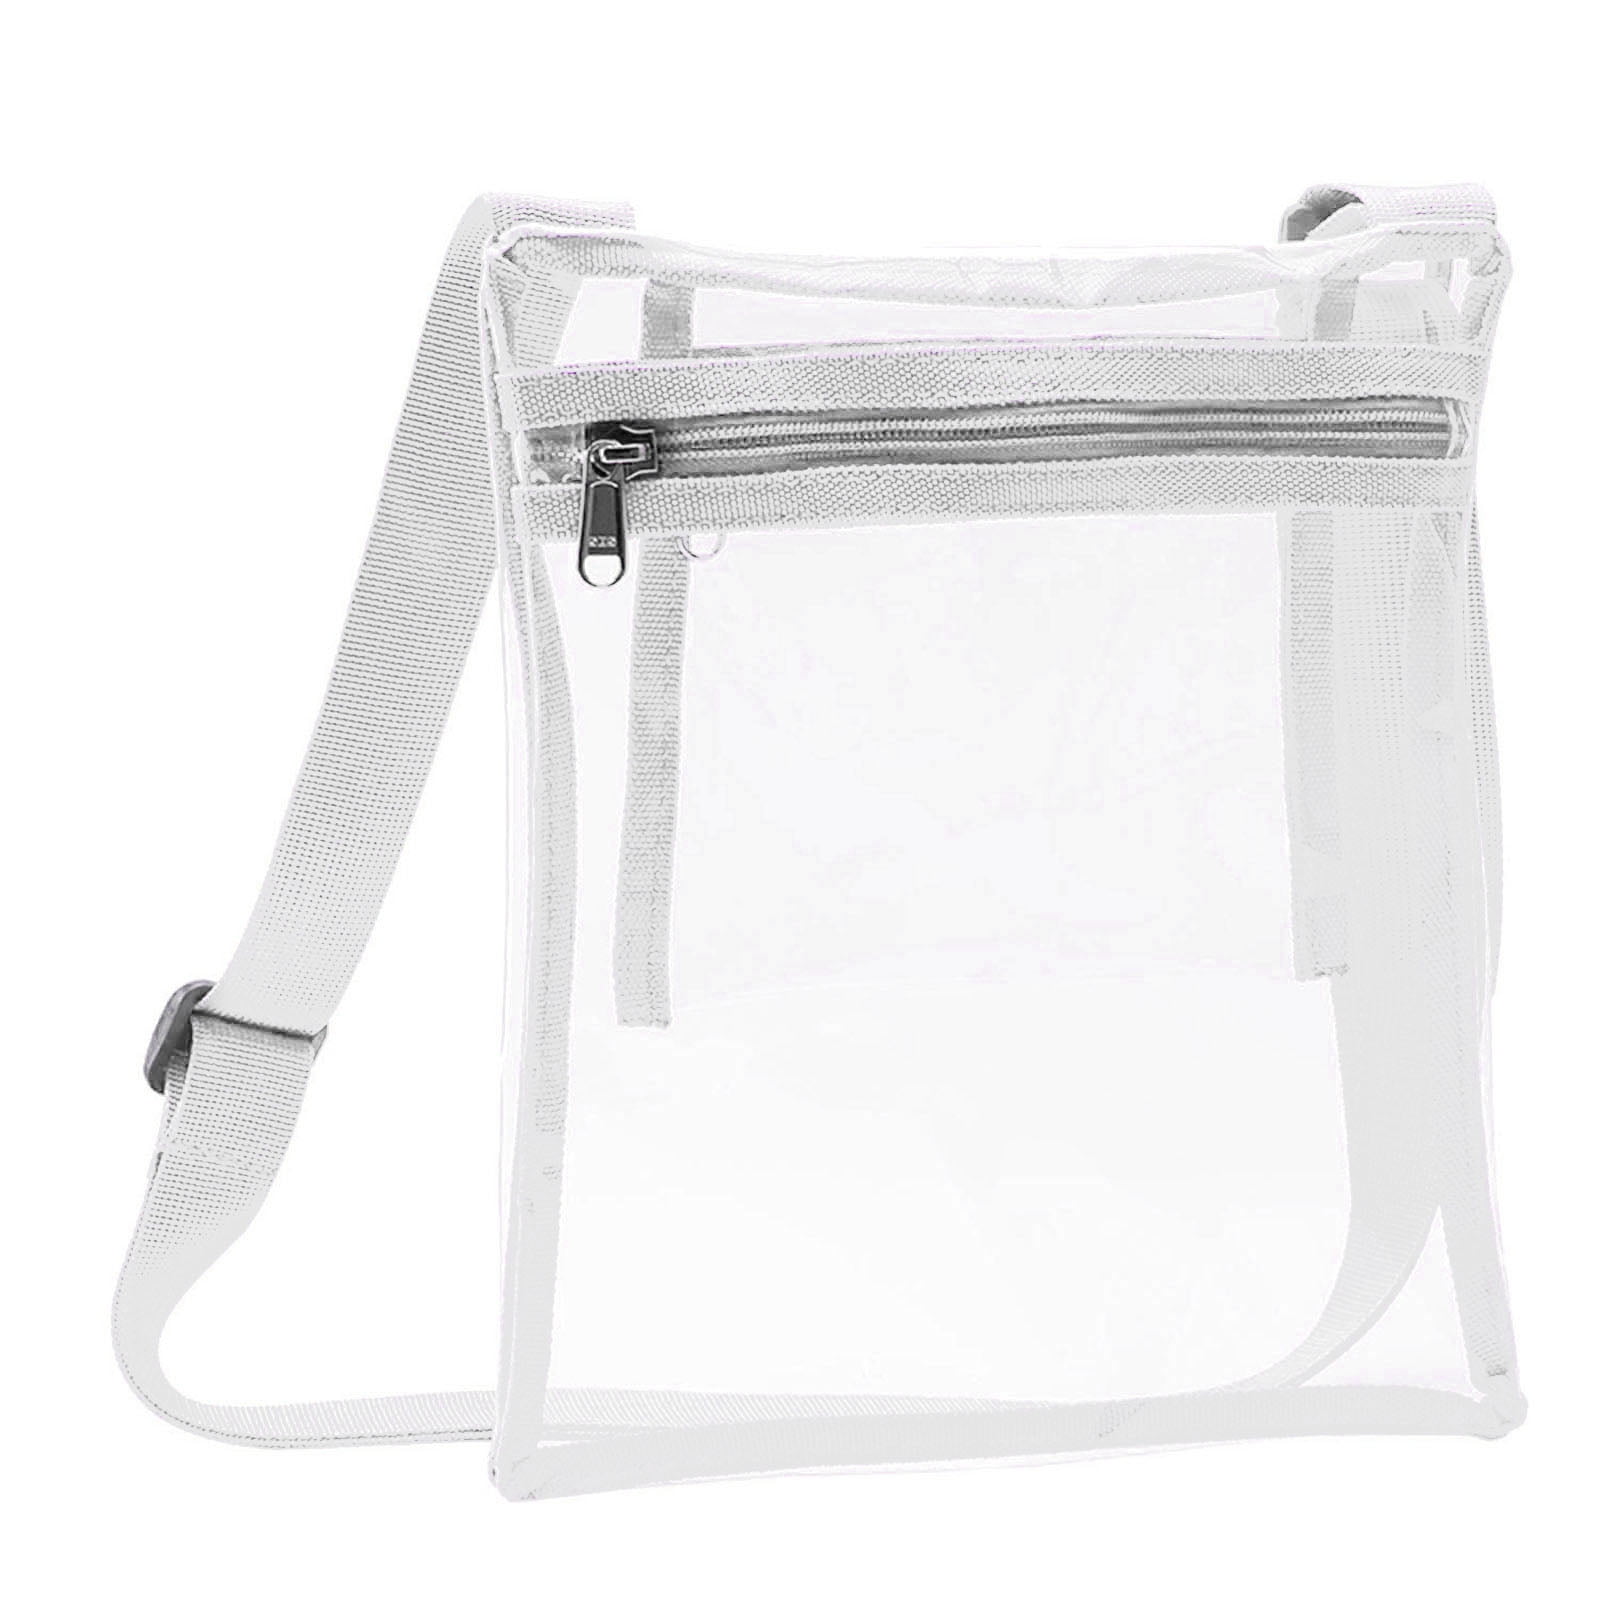 Clear Bag Stadium Approved,Waterproof Clear Crossbody Bag with Inner Pocket and Adjustable Straps,TPU Clear Bag for Stadium/Concert/Festivals/Security  